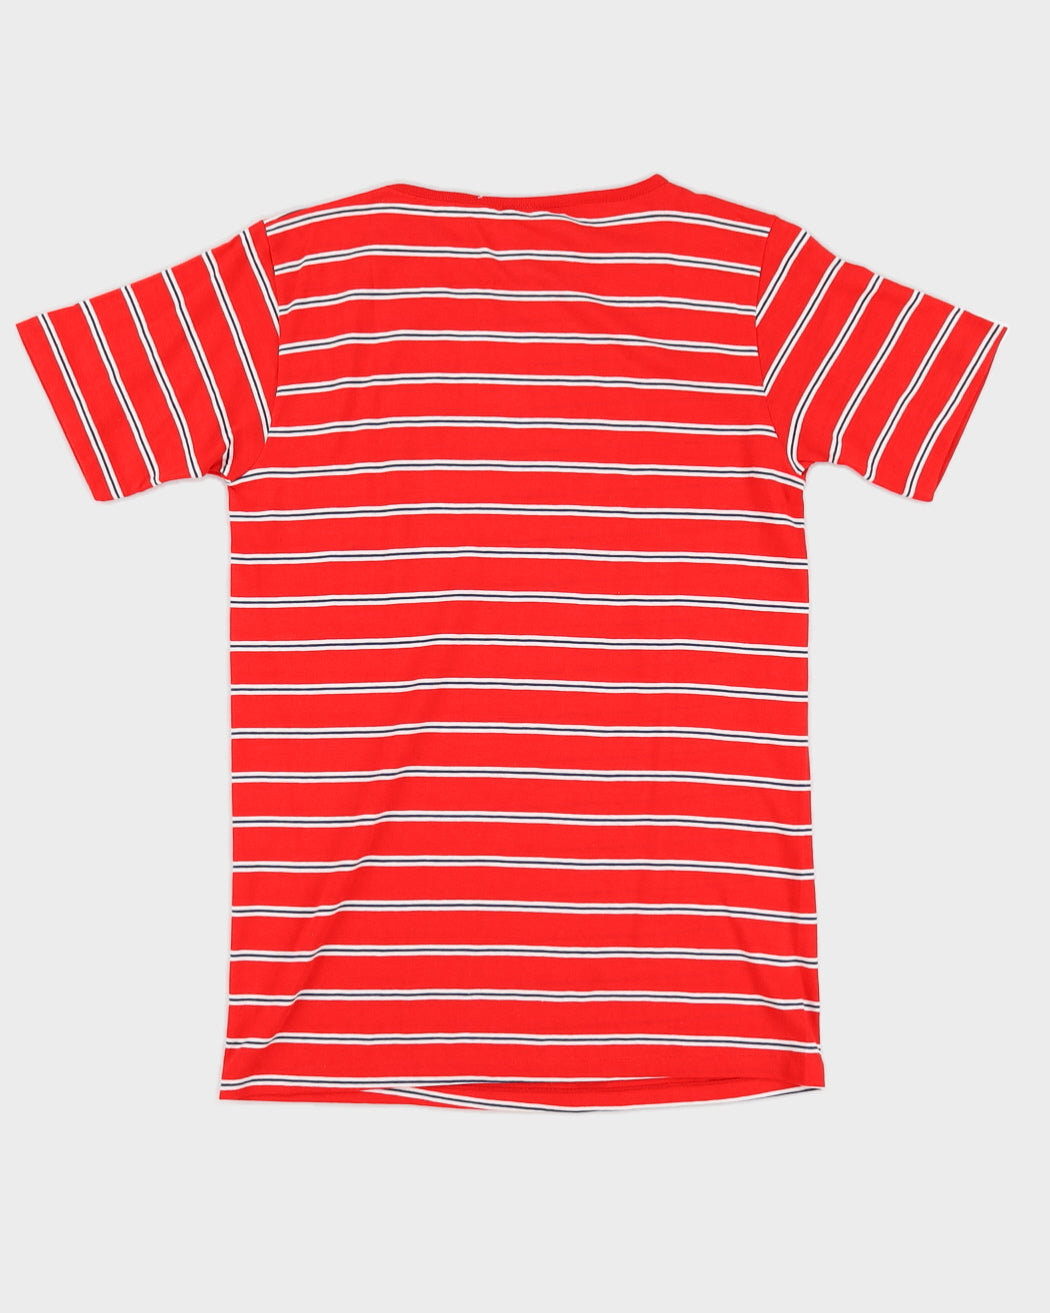 Vintage 70s Levi's Red & Navy Striped T-Shirt - M